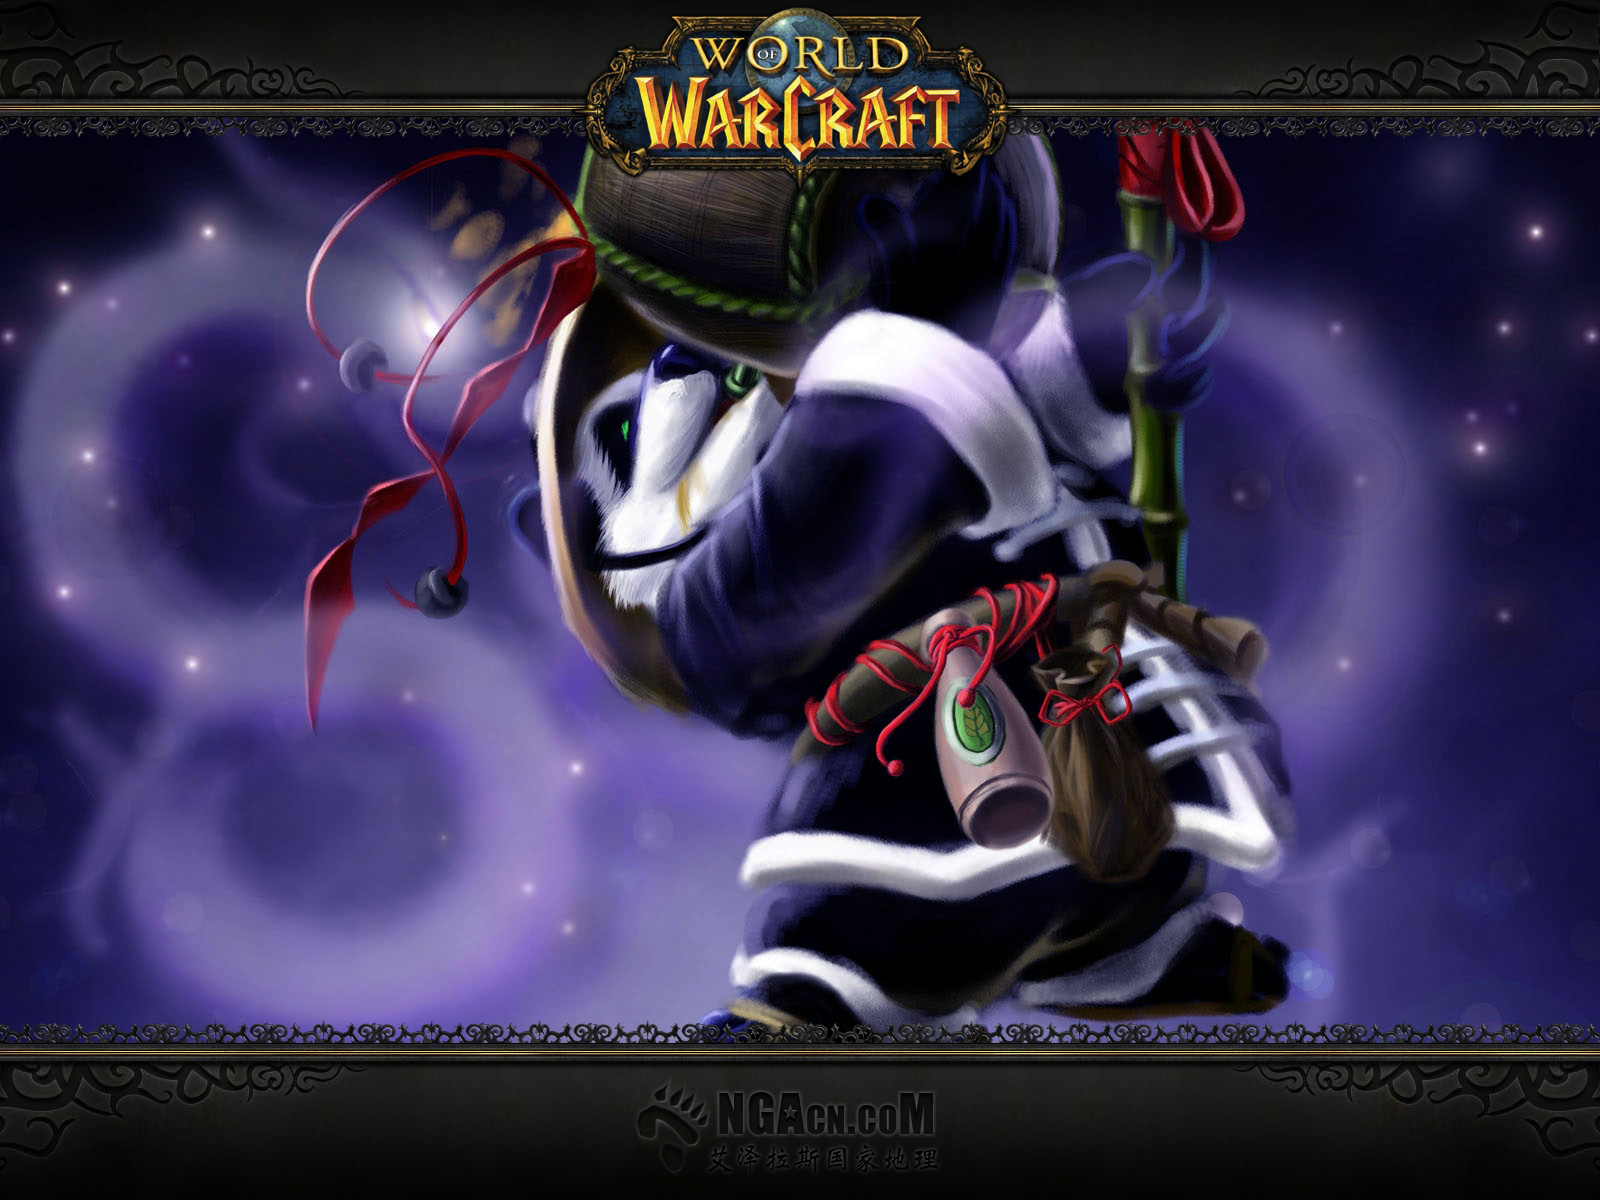 Desktop Wallpapers World of WarCraft vdeo game WoW Games